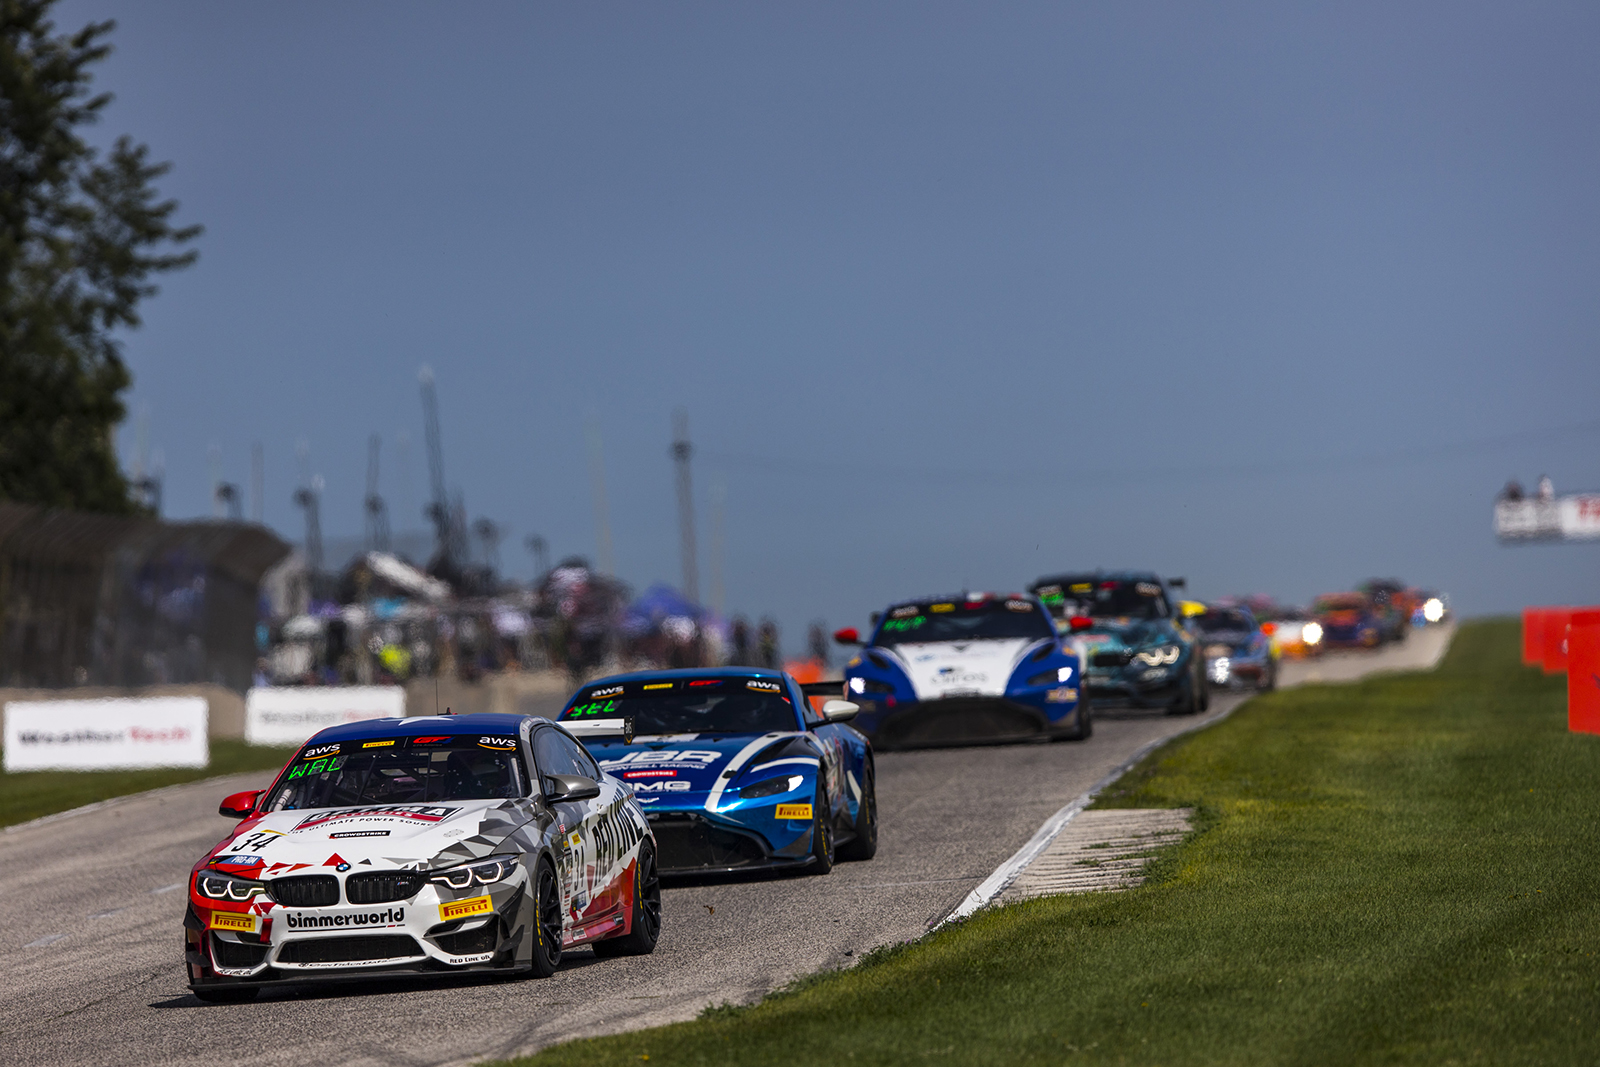 BimmerWorld M4 GT4 leading the pack at Road America